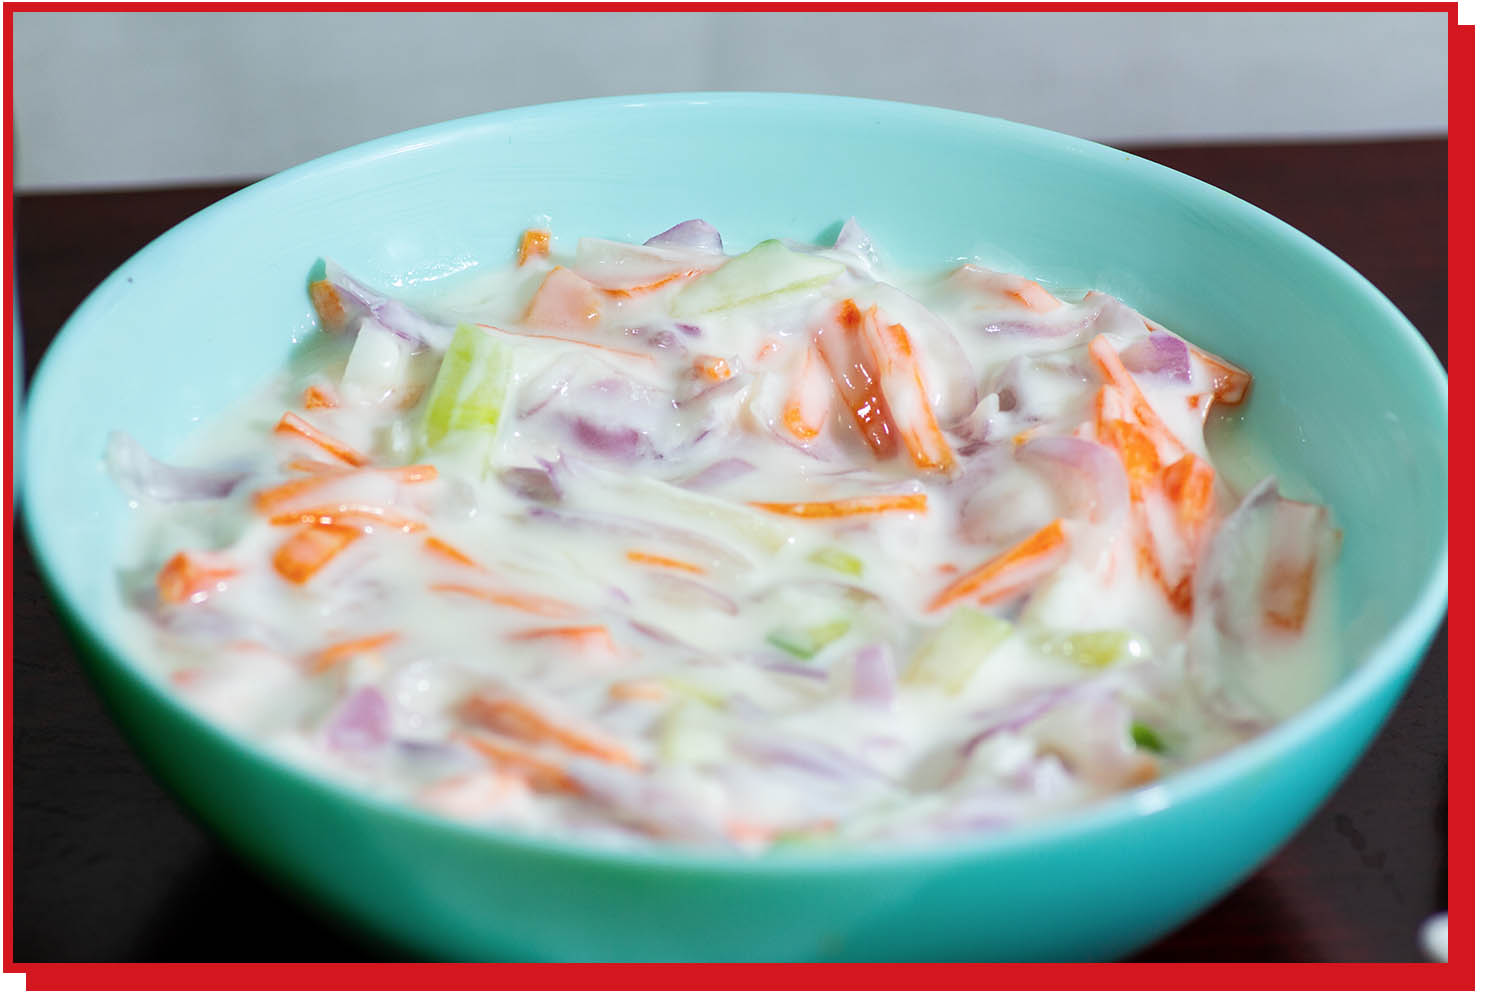 A bowl of shredded carrots, celery, and onions mixed in yogurt.